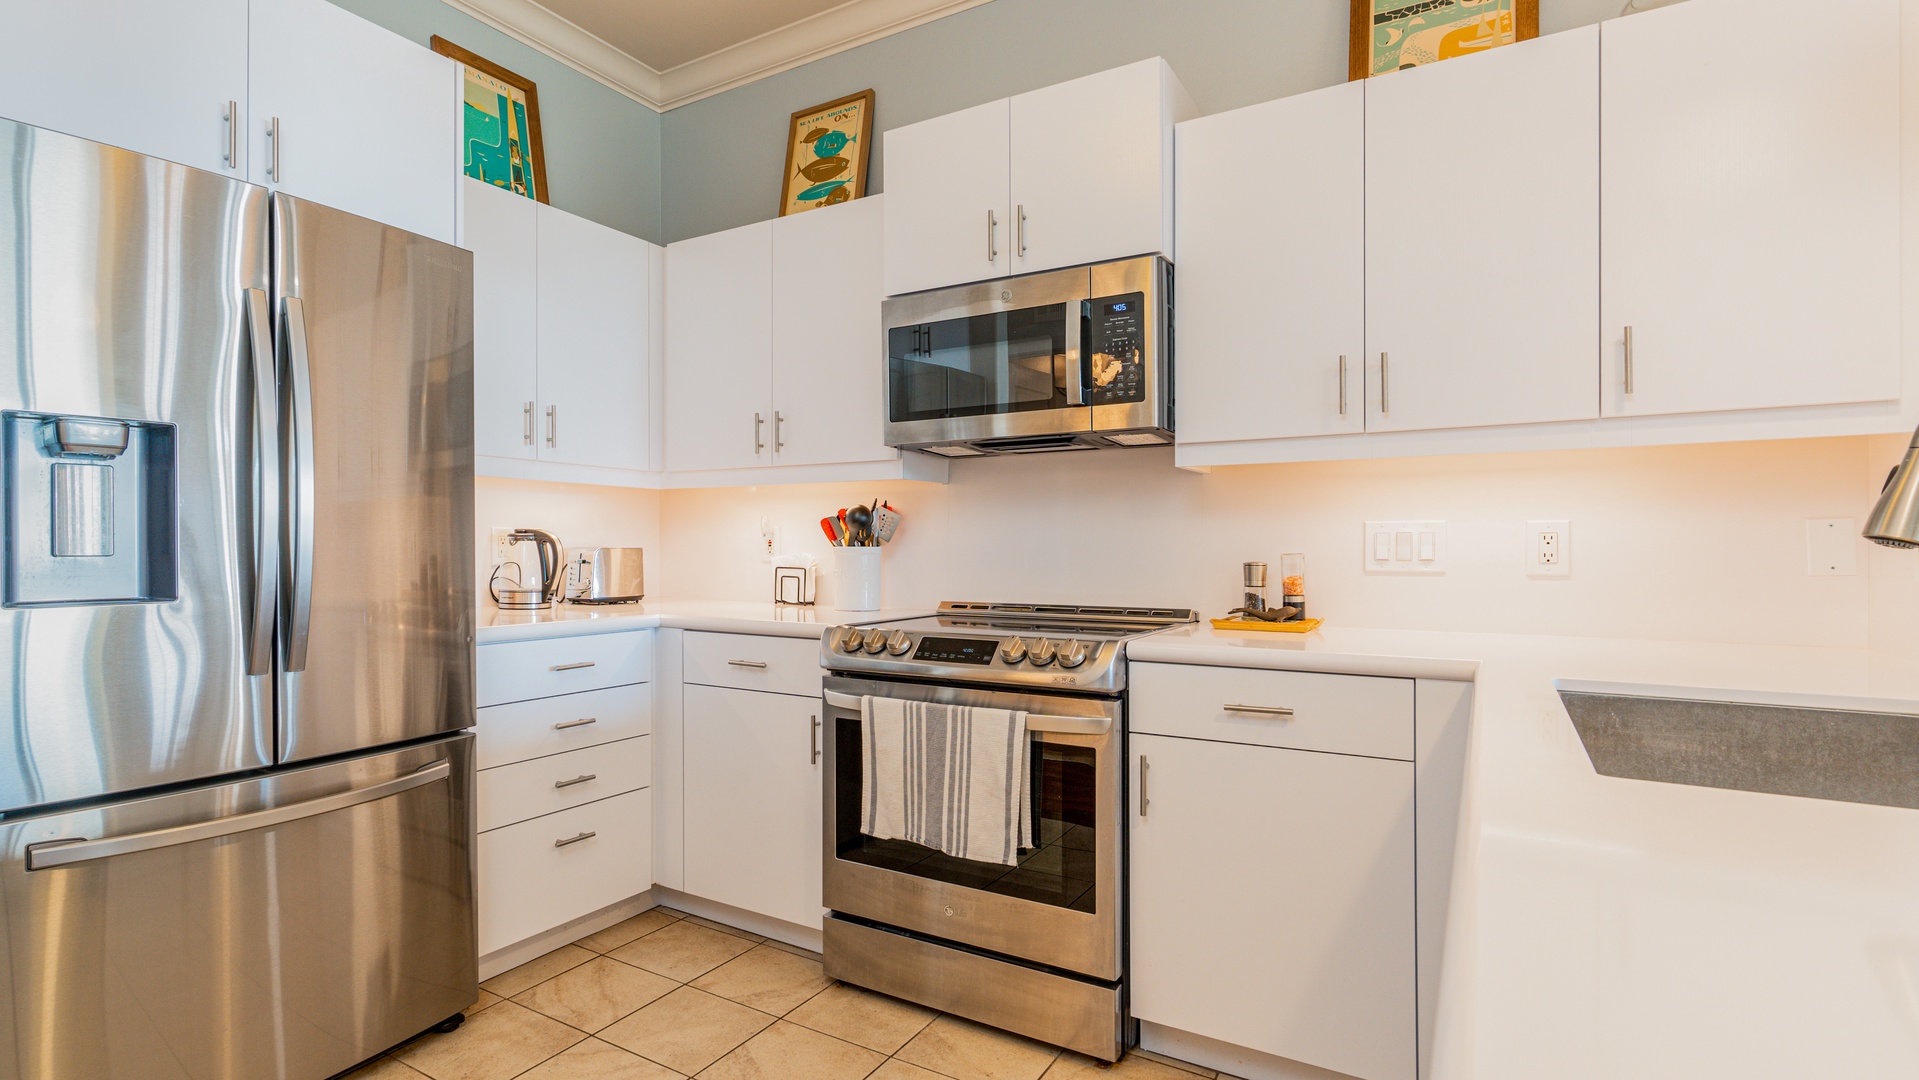 Kapolei Vacation Rentals, Kai Lani 24B - All the amenities you need for a culinary adventure.